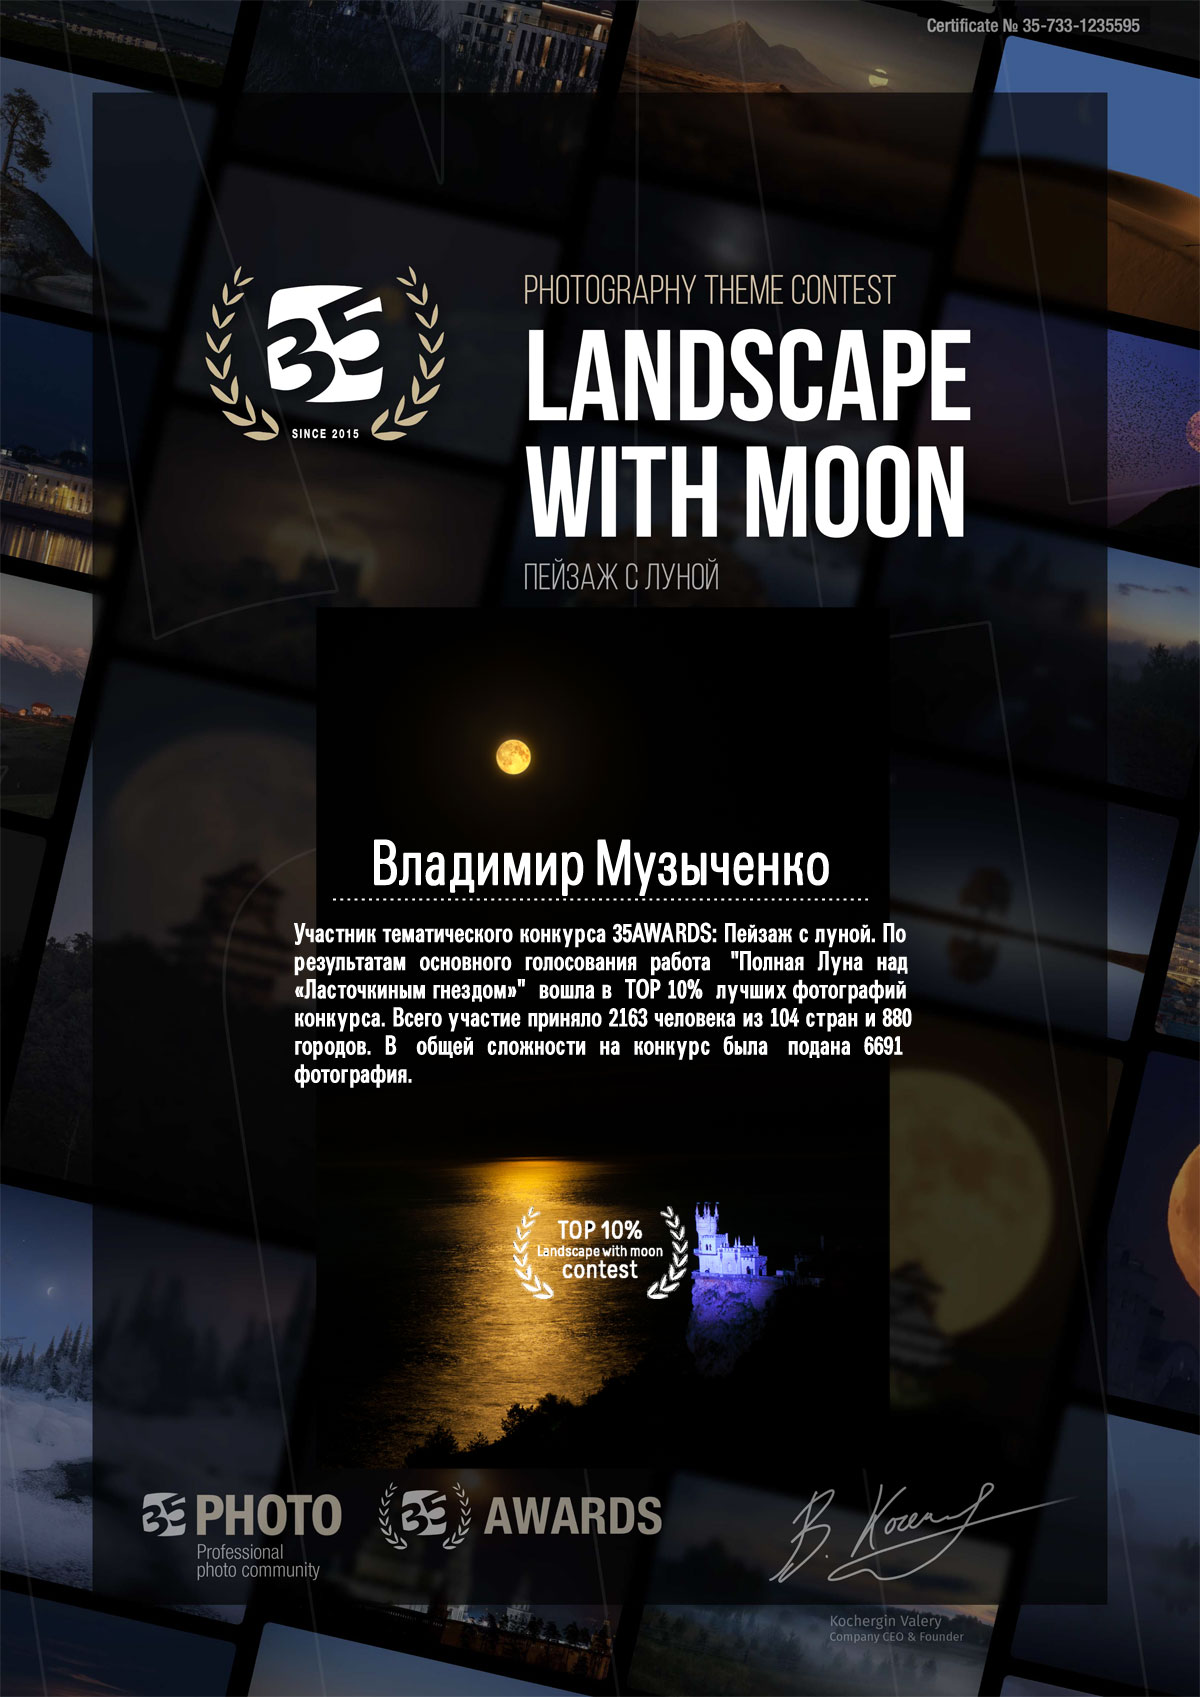   35AWARDS: Landscape with moon TOP 10% Landscape with moon contest